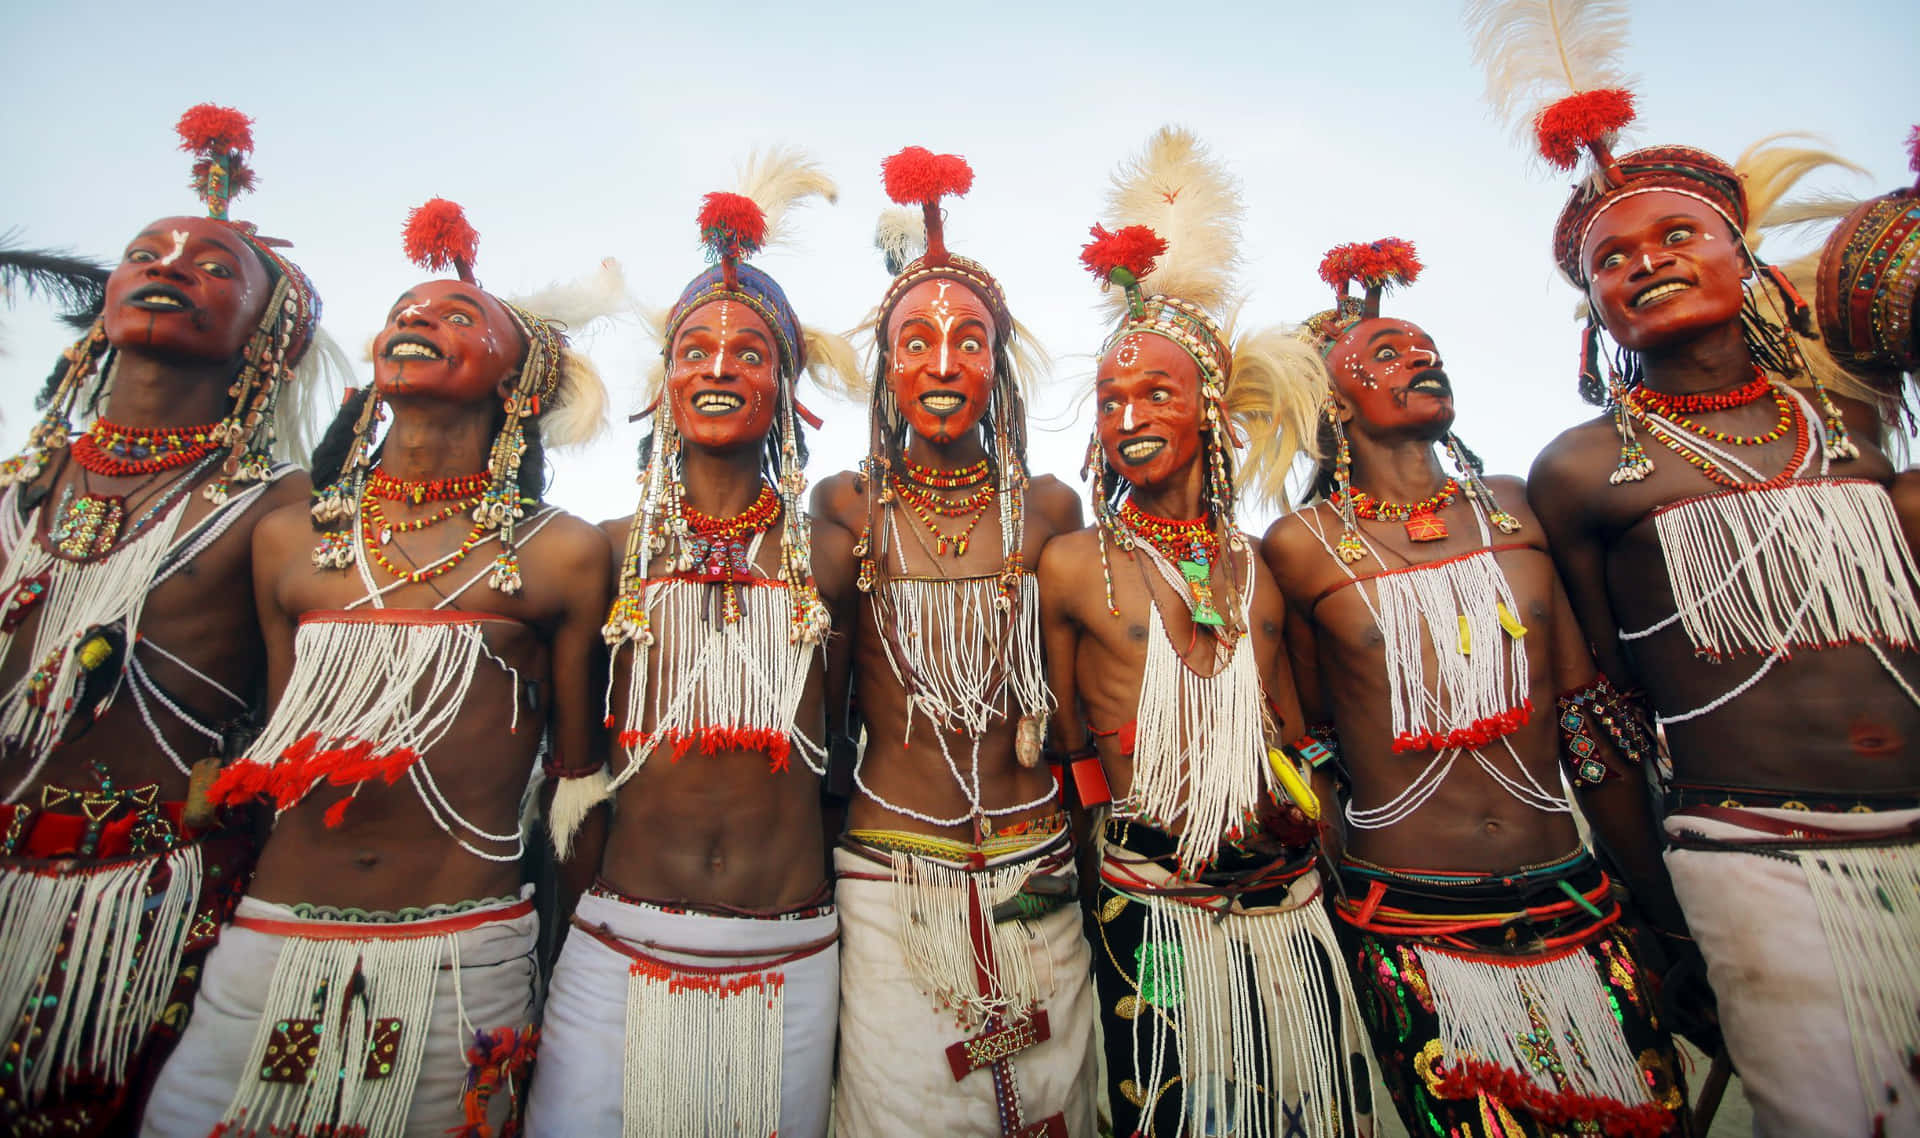 A Group Of Men In Traditional Attire Are Standing Together